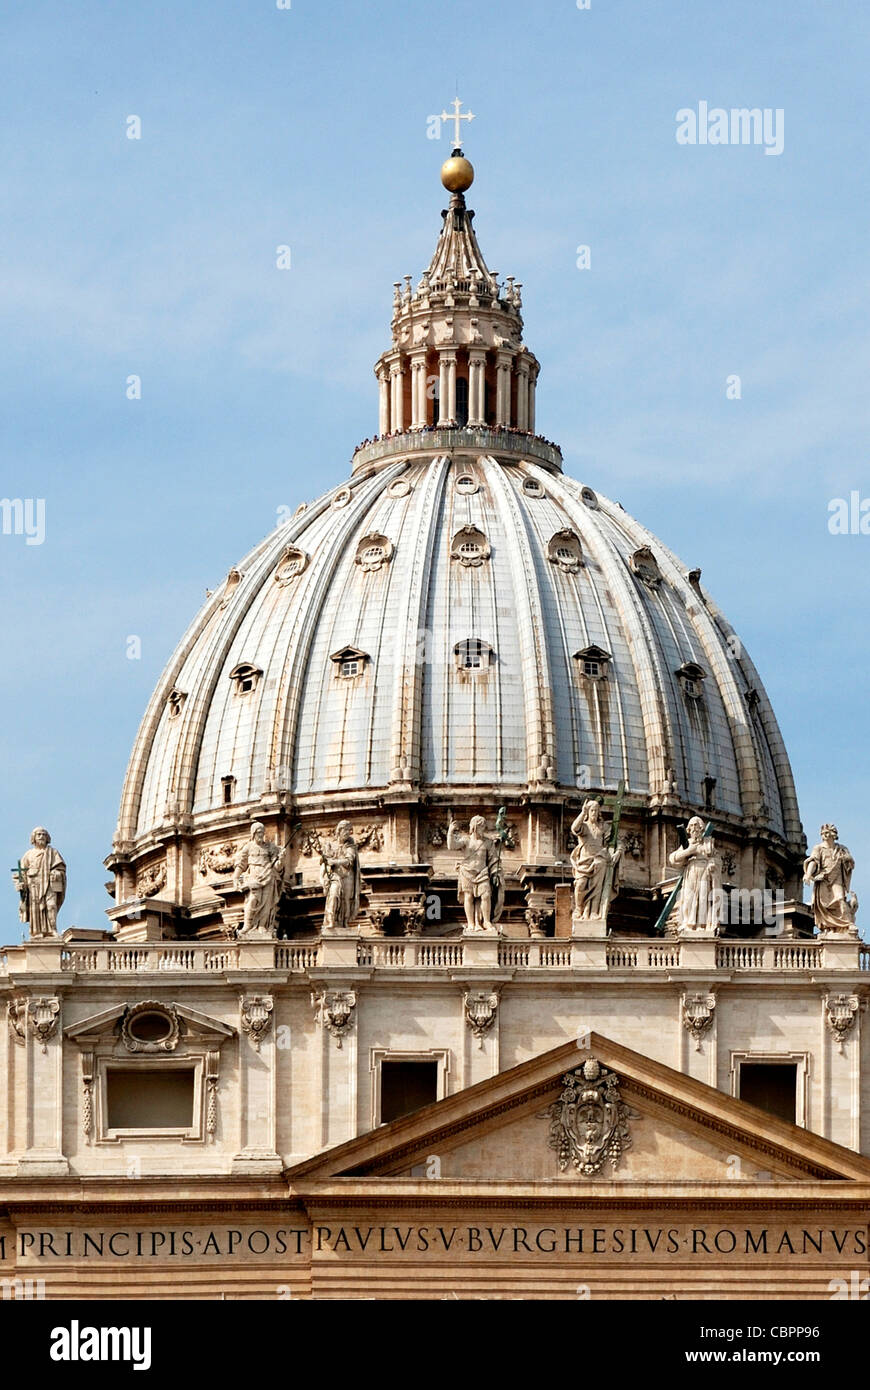 Saint Peters Basilica on the Saint Peters Square in Vatican City in Rome. Stock Photo